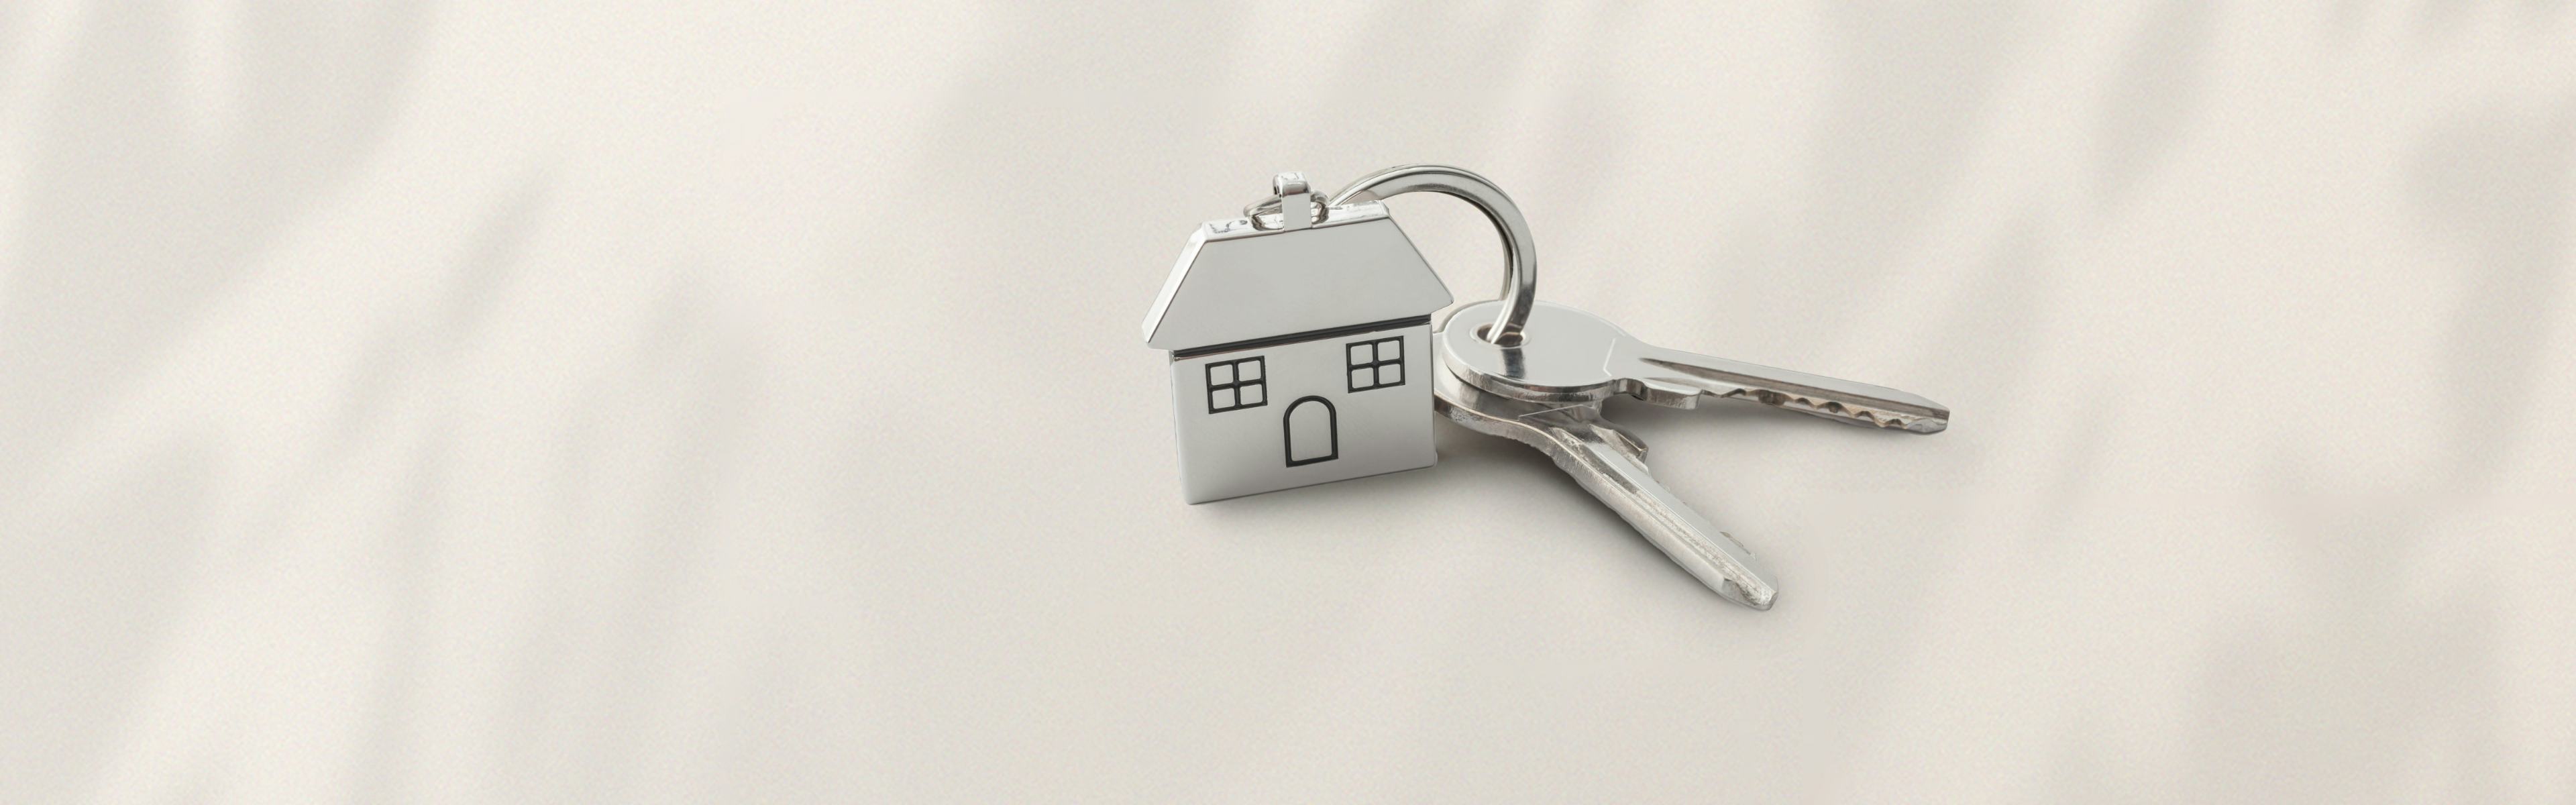 A keychain with a house on it.